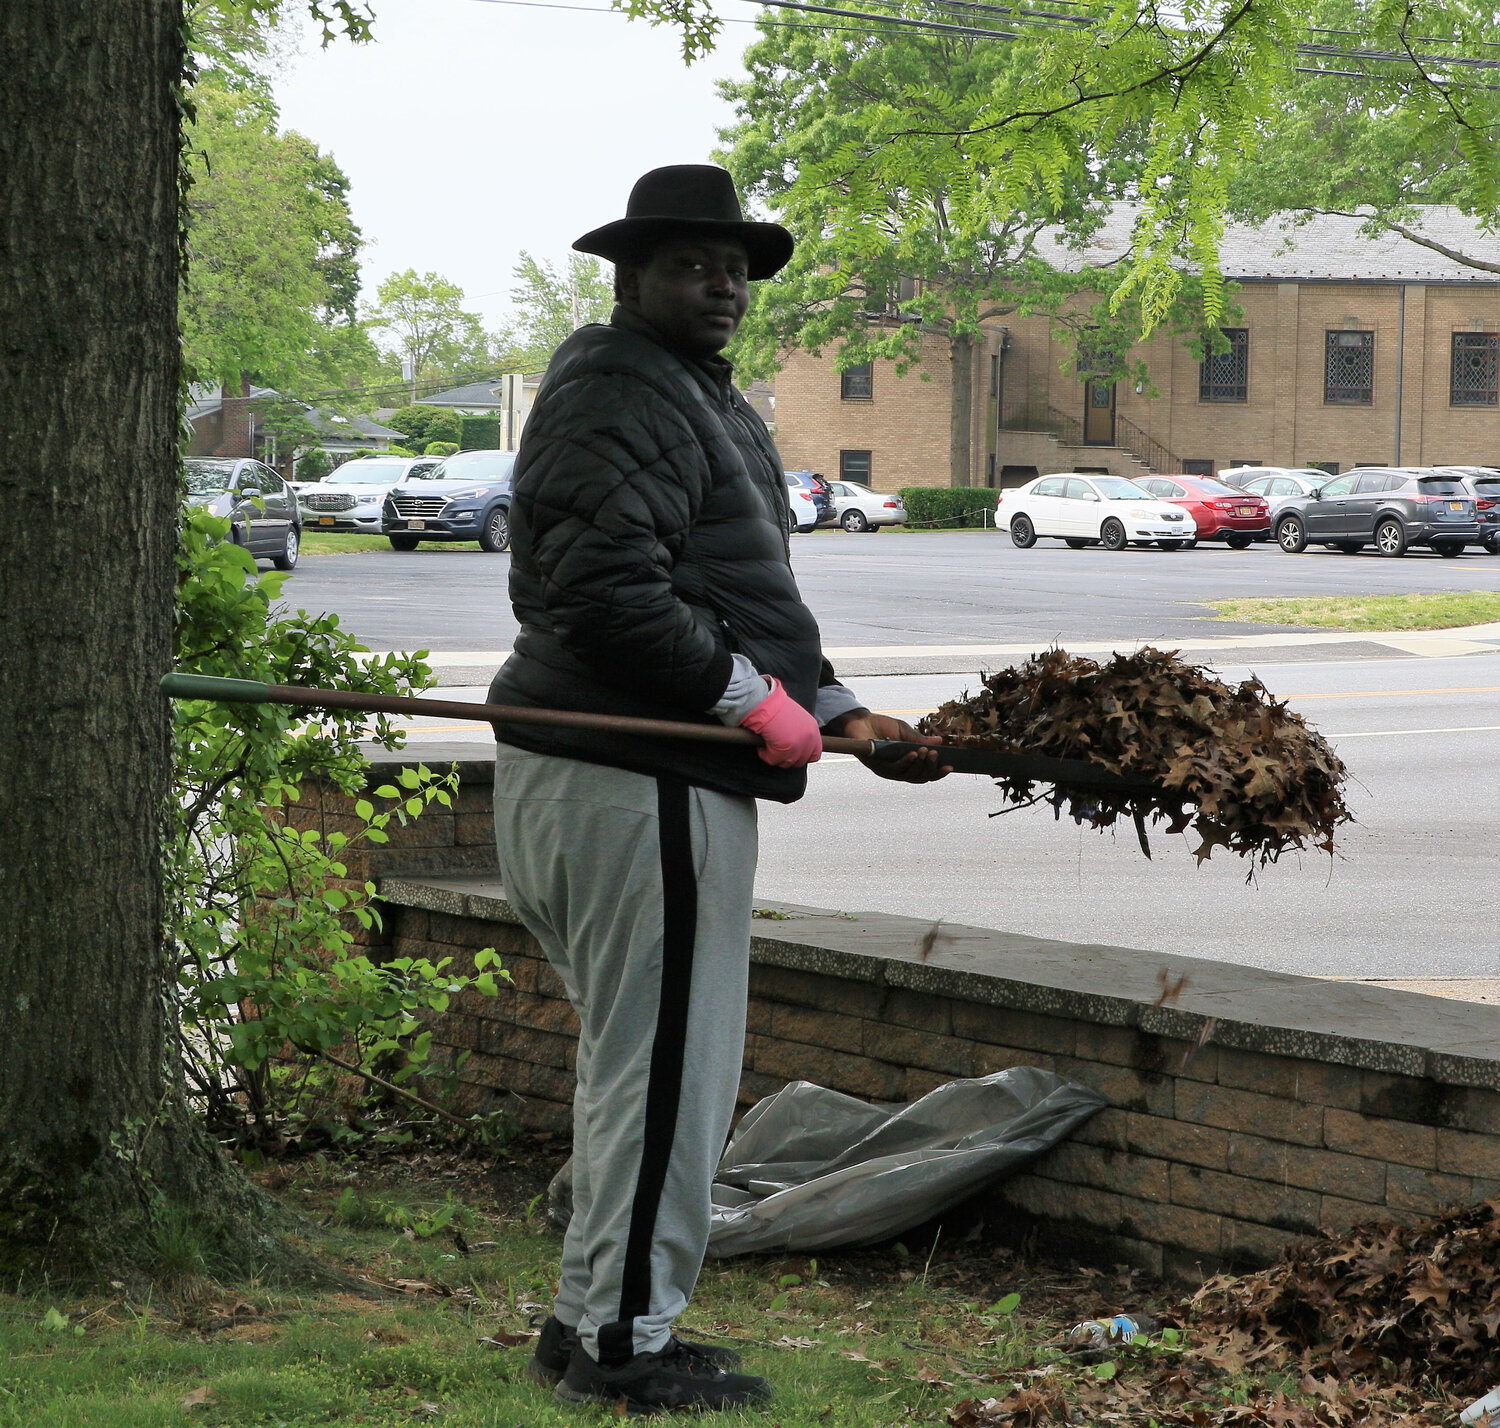 BaBa Carseck helps clean up the debris around the park.